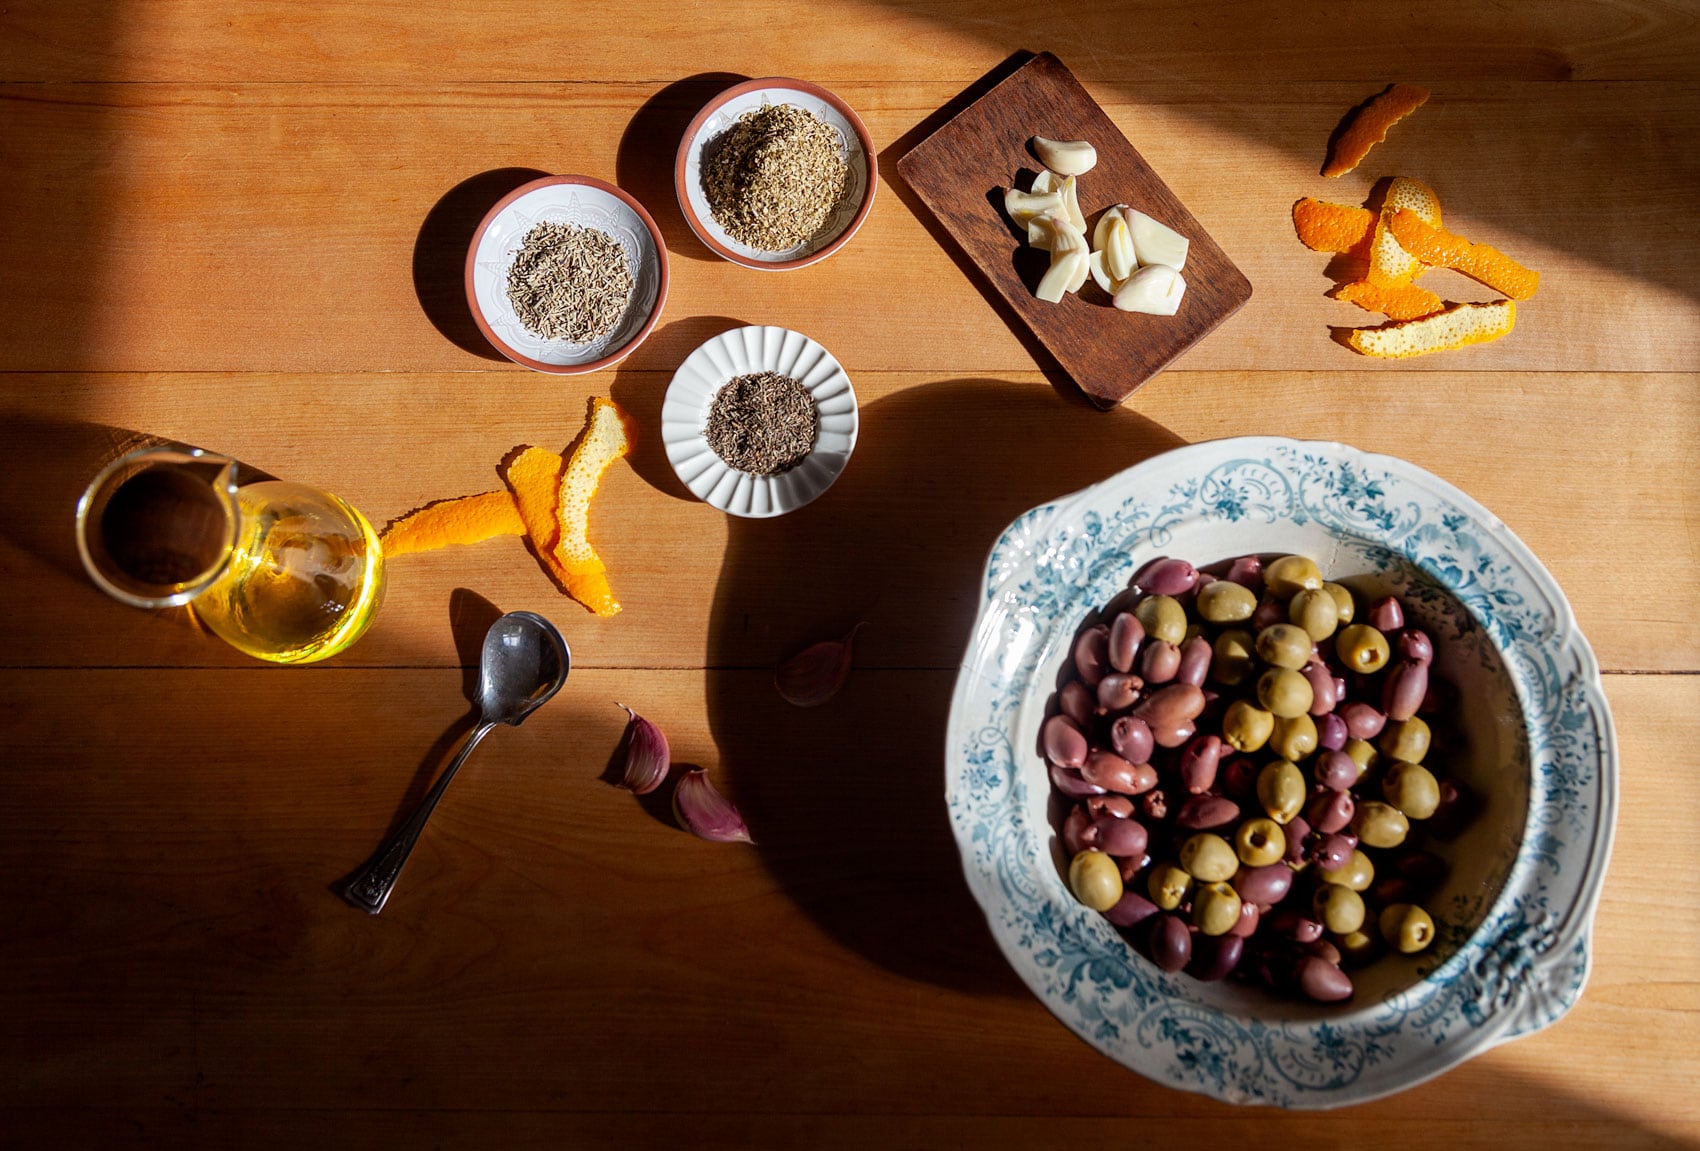 Marinated Olives with Herbs, Garlic, and Orange Recipe